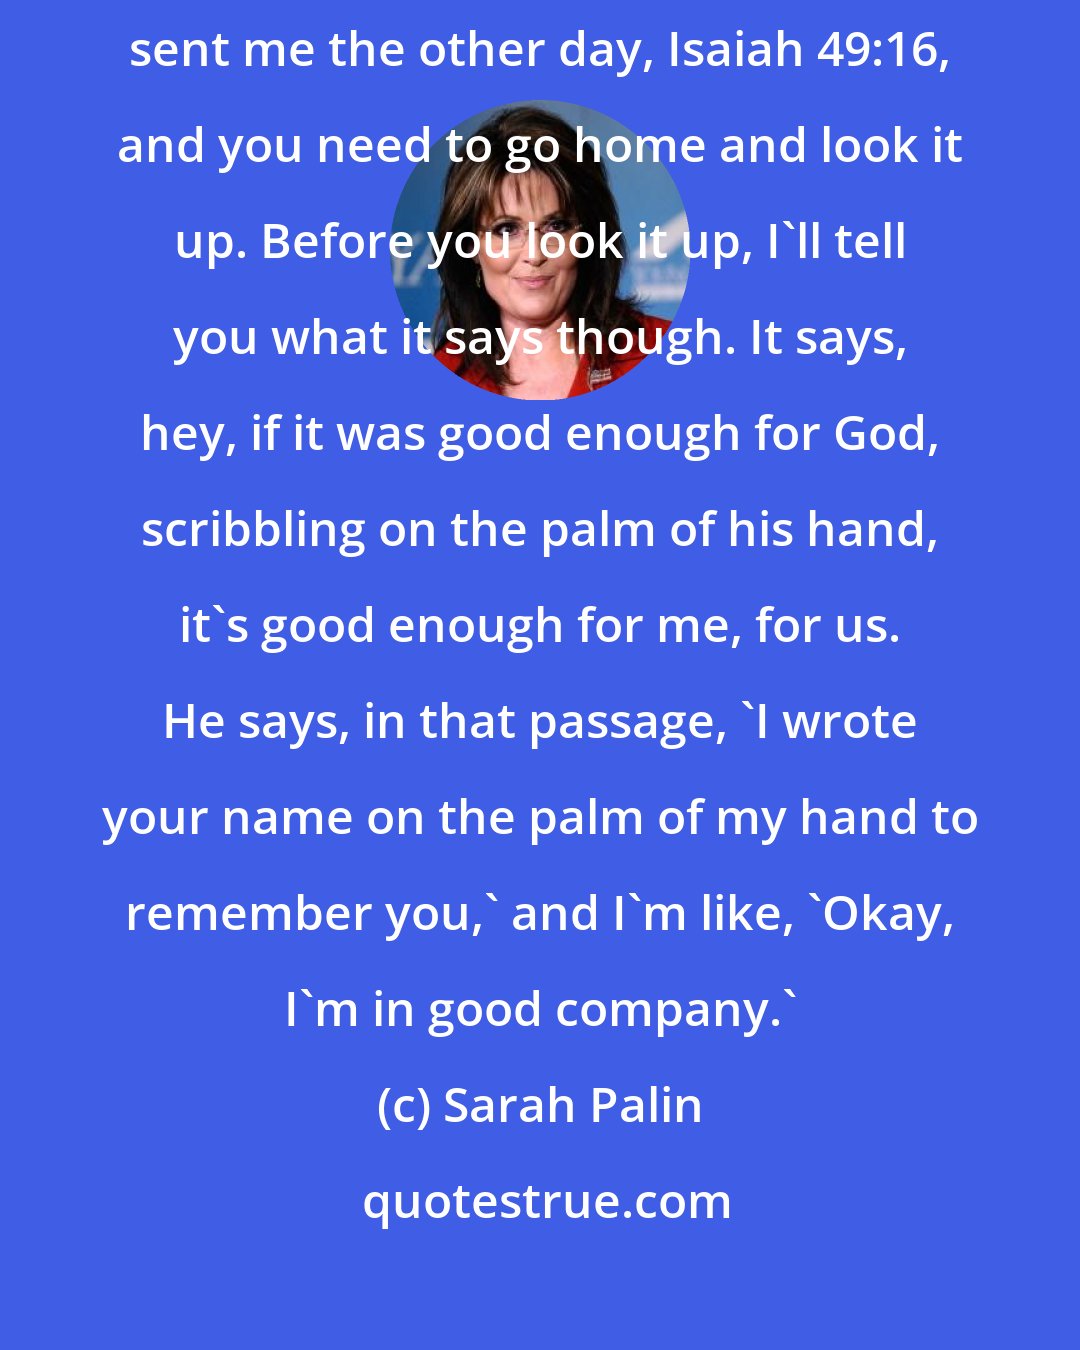 Sarah Palin: I didn't really had a good answer, as so often -- is me. But then somebody sent me the other day, Isaiah 49:16, and you need to go home and look it up. Before you look it up, I'll tell you what it says though. It says, hey, if it was good enough for God, scribbling on the palm of his hand, it's good enough for me, for us. He says, in that passage, 'I wrote your name on the palm of my hand to remember you,' and I'm like, 'Okay, I'm in good company.'